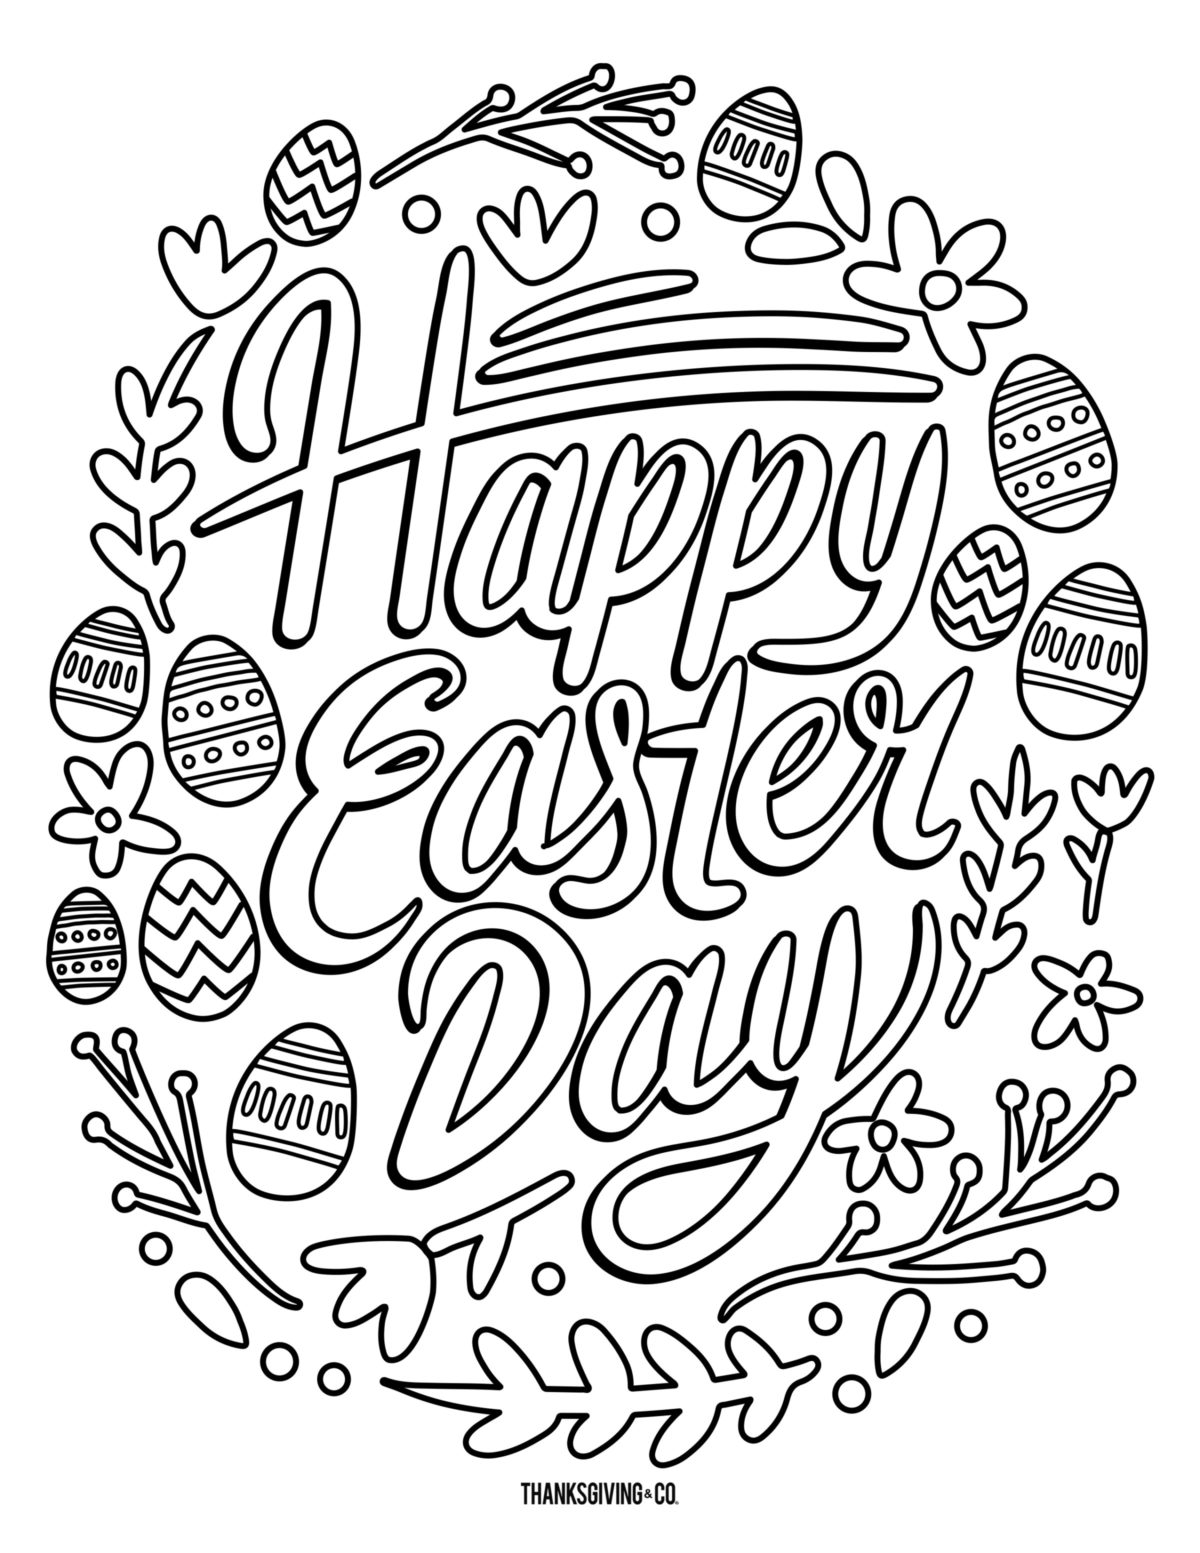 5 free printable Easter coloring pages for adults that will relieve holiday  stress